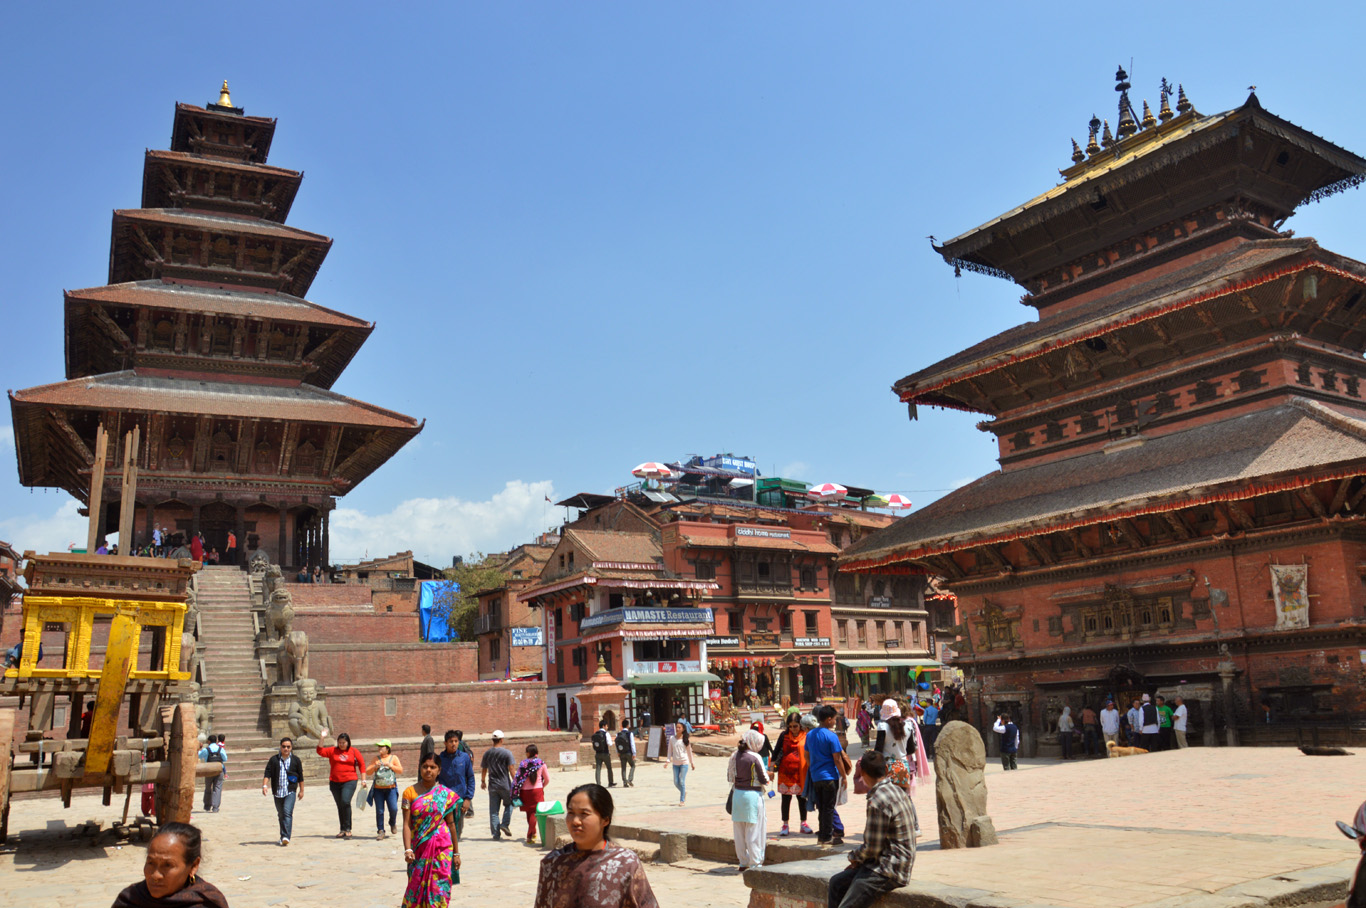 Over 167,000 tourists visited Bhaktapur in FY 2022/23